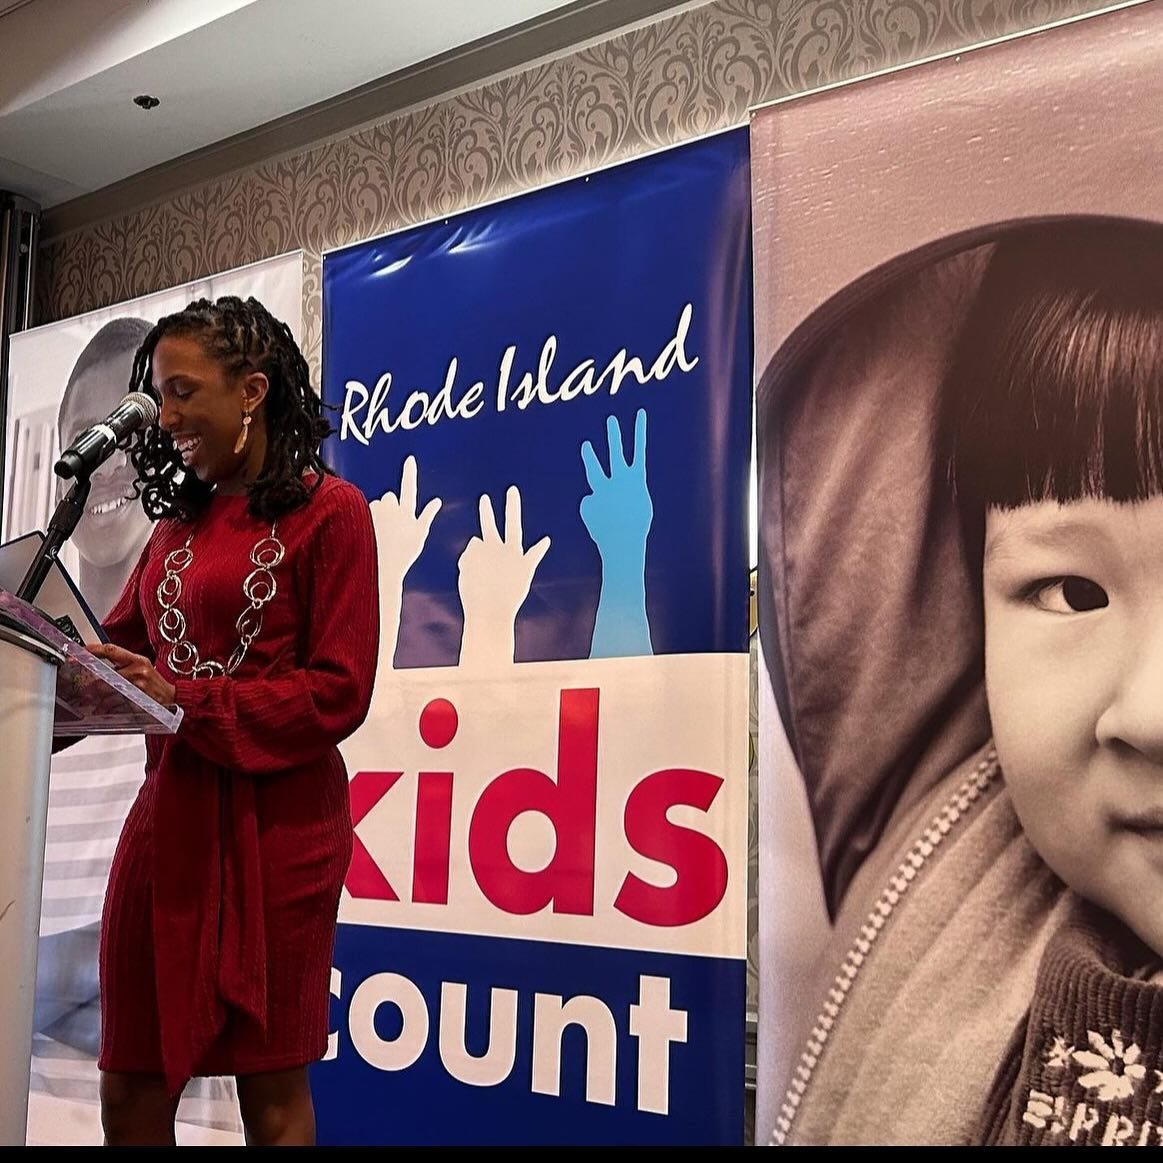 We are delighted to share that @laurieberknerband will be partnering up with @rikidscount today for both shows at the @egodeum in East Greenwich, RI. 🪇

@rikidscount has been creating strong statewide policies and advocating for Rhode Island&rsquo;s